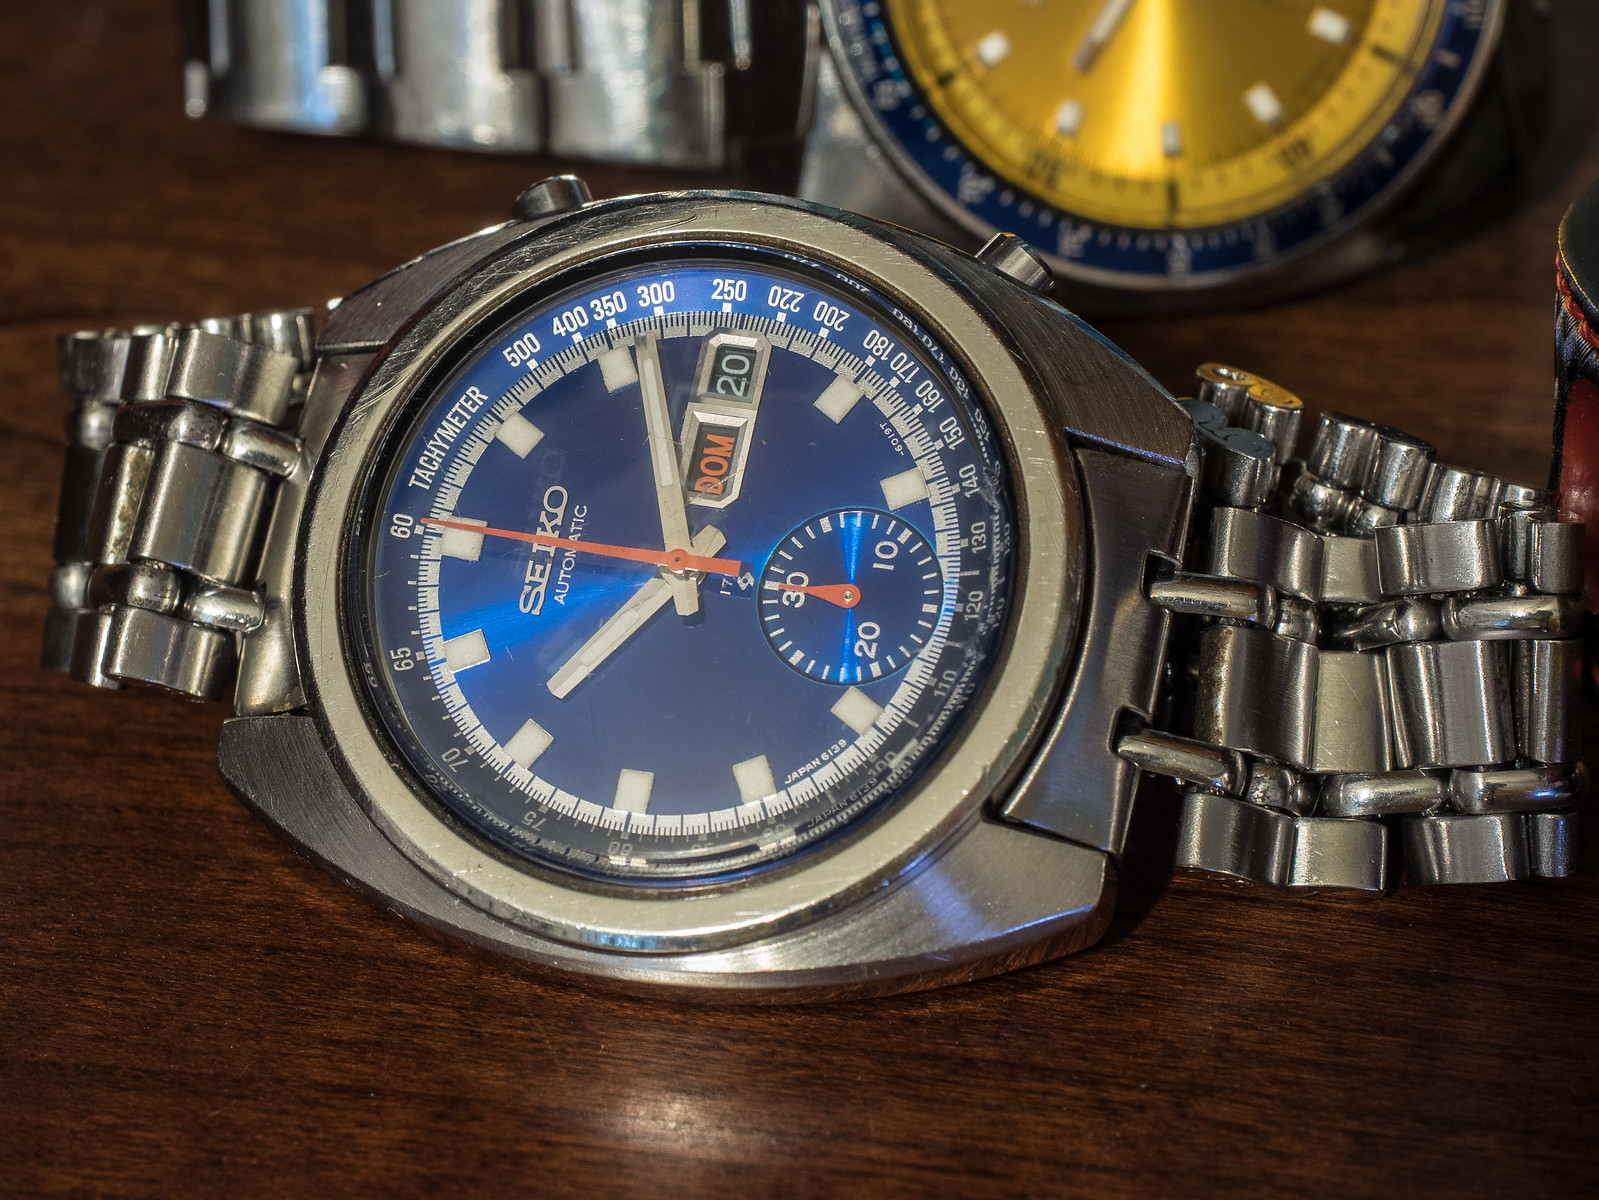 Ends 9/3 - Seiko 6139-6015 chrono from May 1972 | WatchUSeek Watch Forums